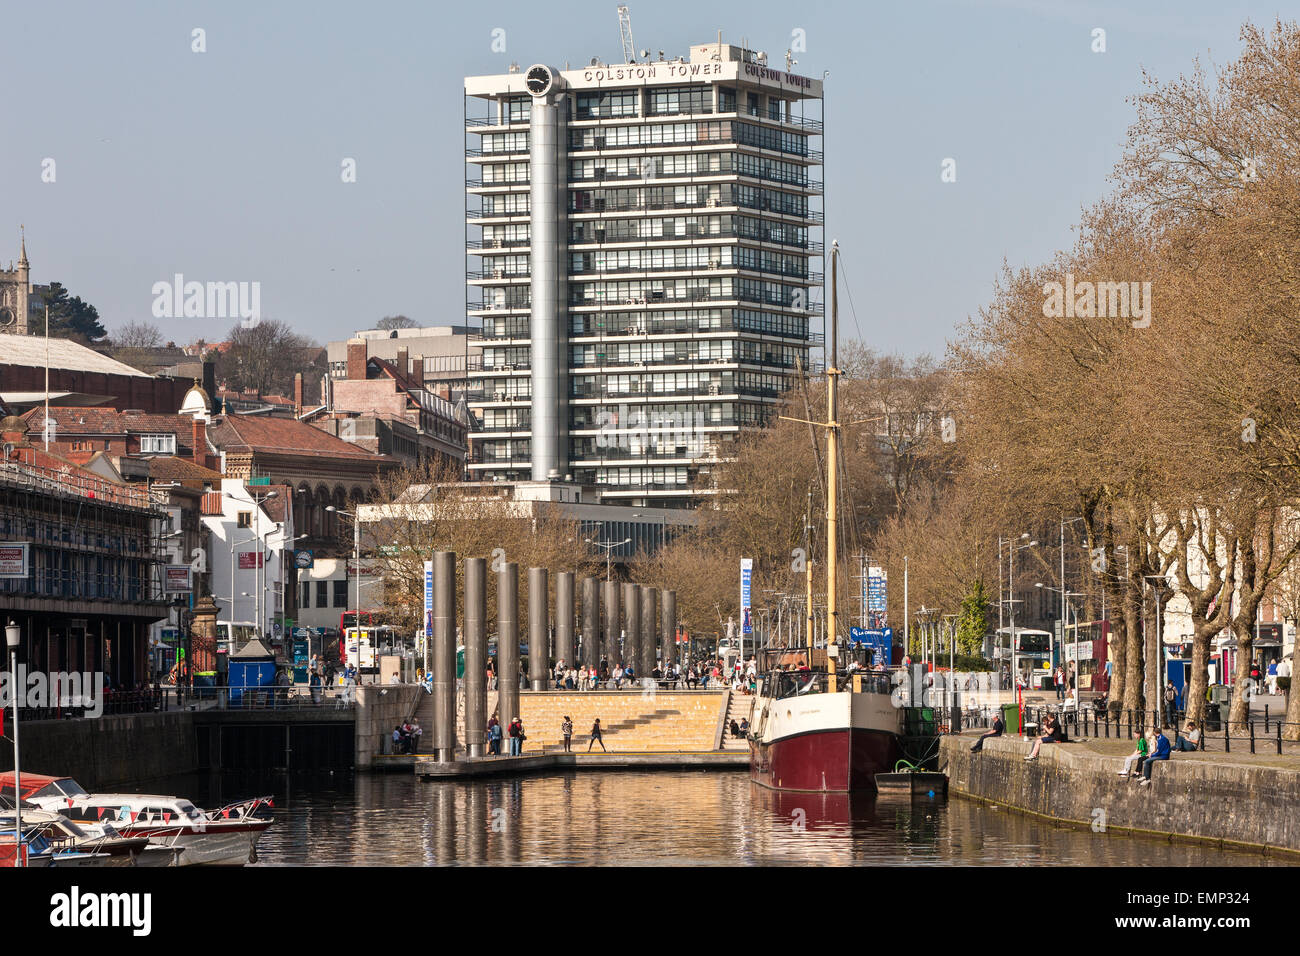 View of Colston Tower,the,slave trader,Colston,has,become,a,controversial,figure from Harbourside, with cascading waterfall feature, Bristol,Englan,UK Stock Photo